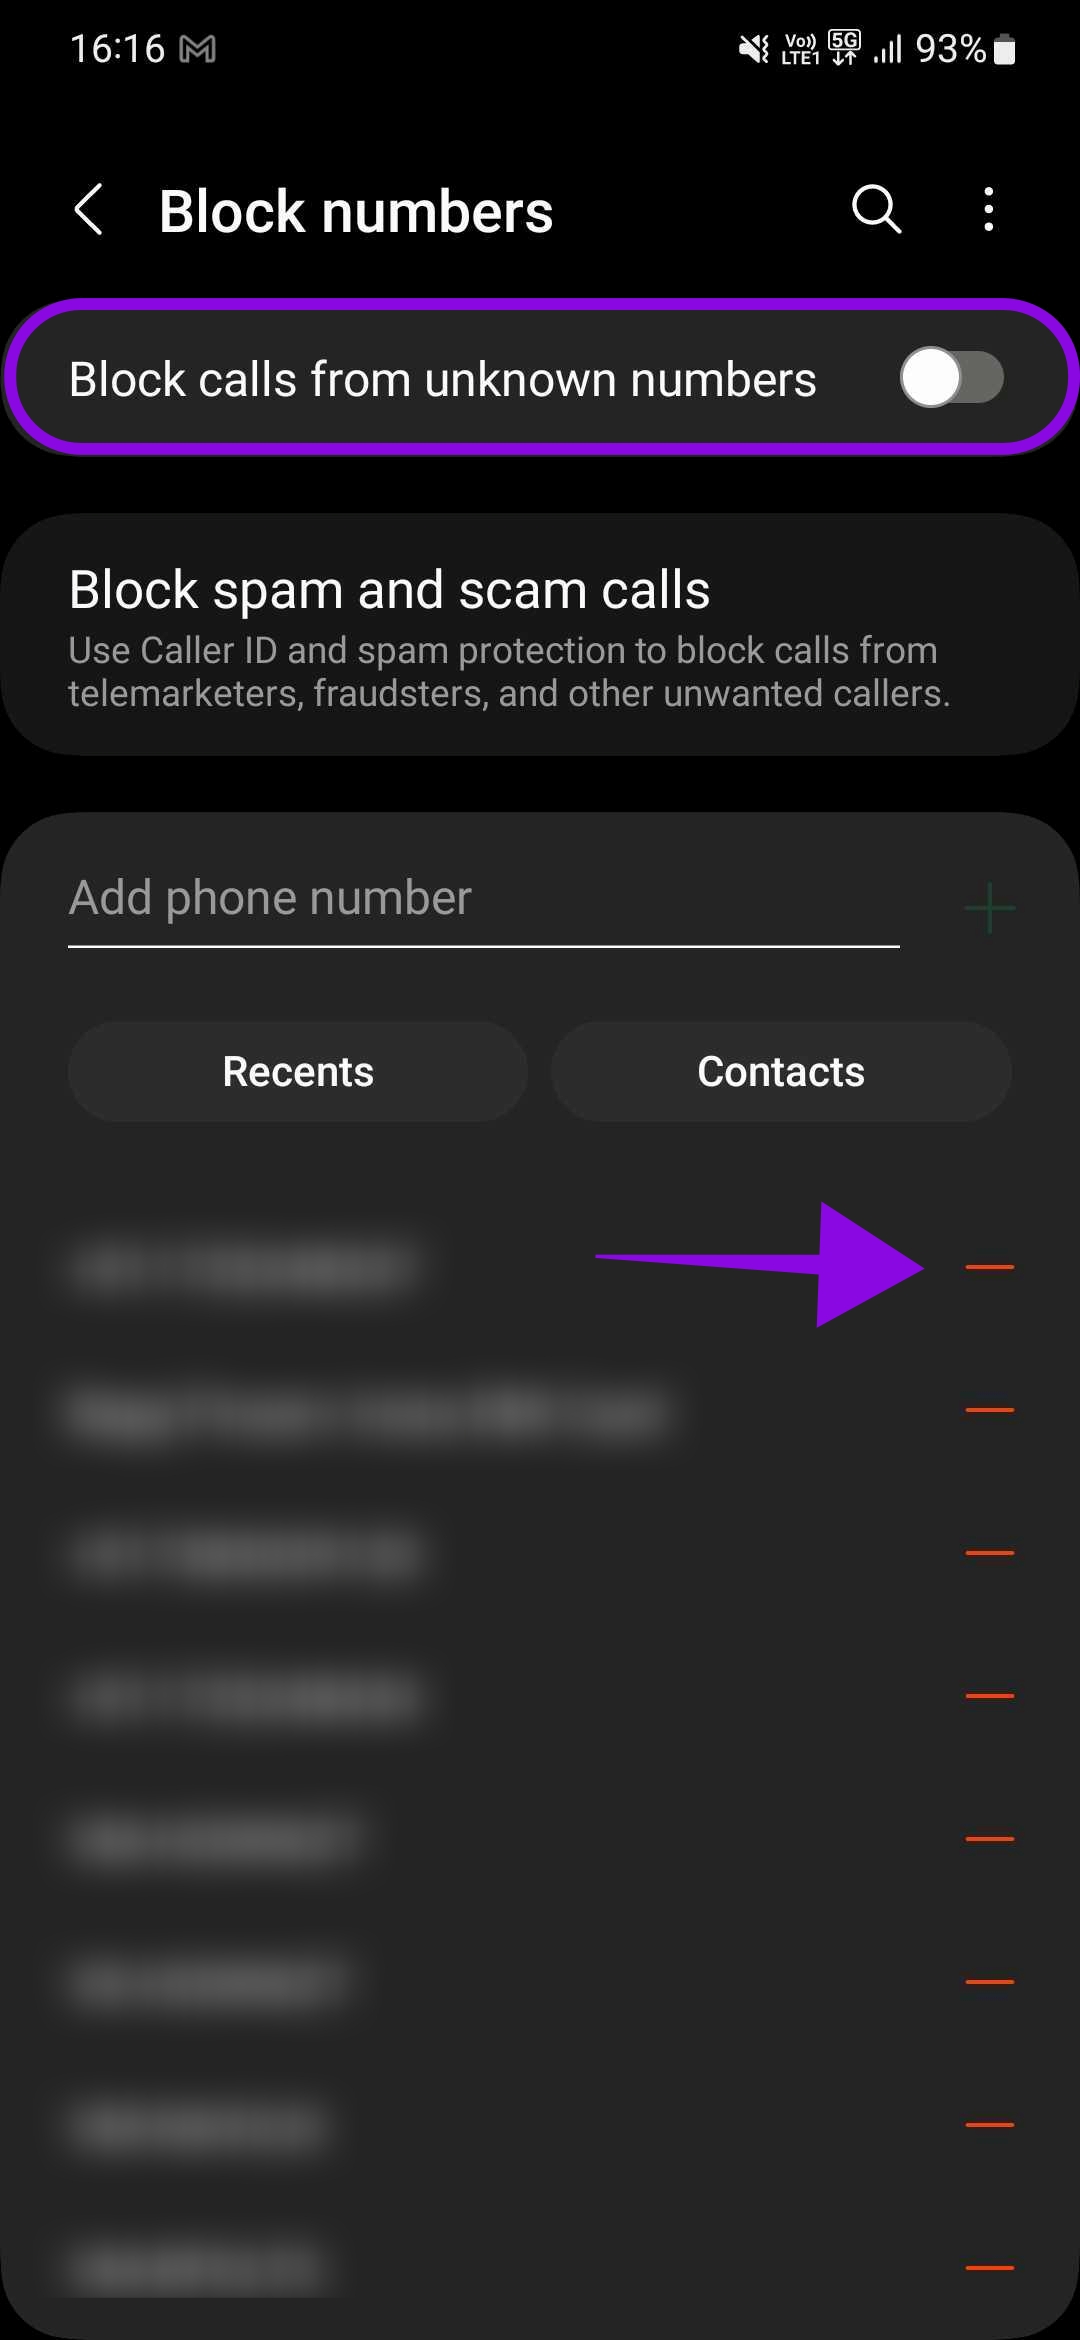 tap minus to unblock contacts.